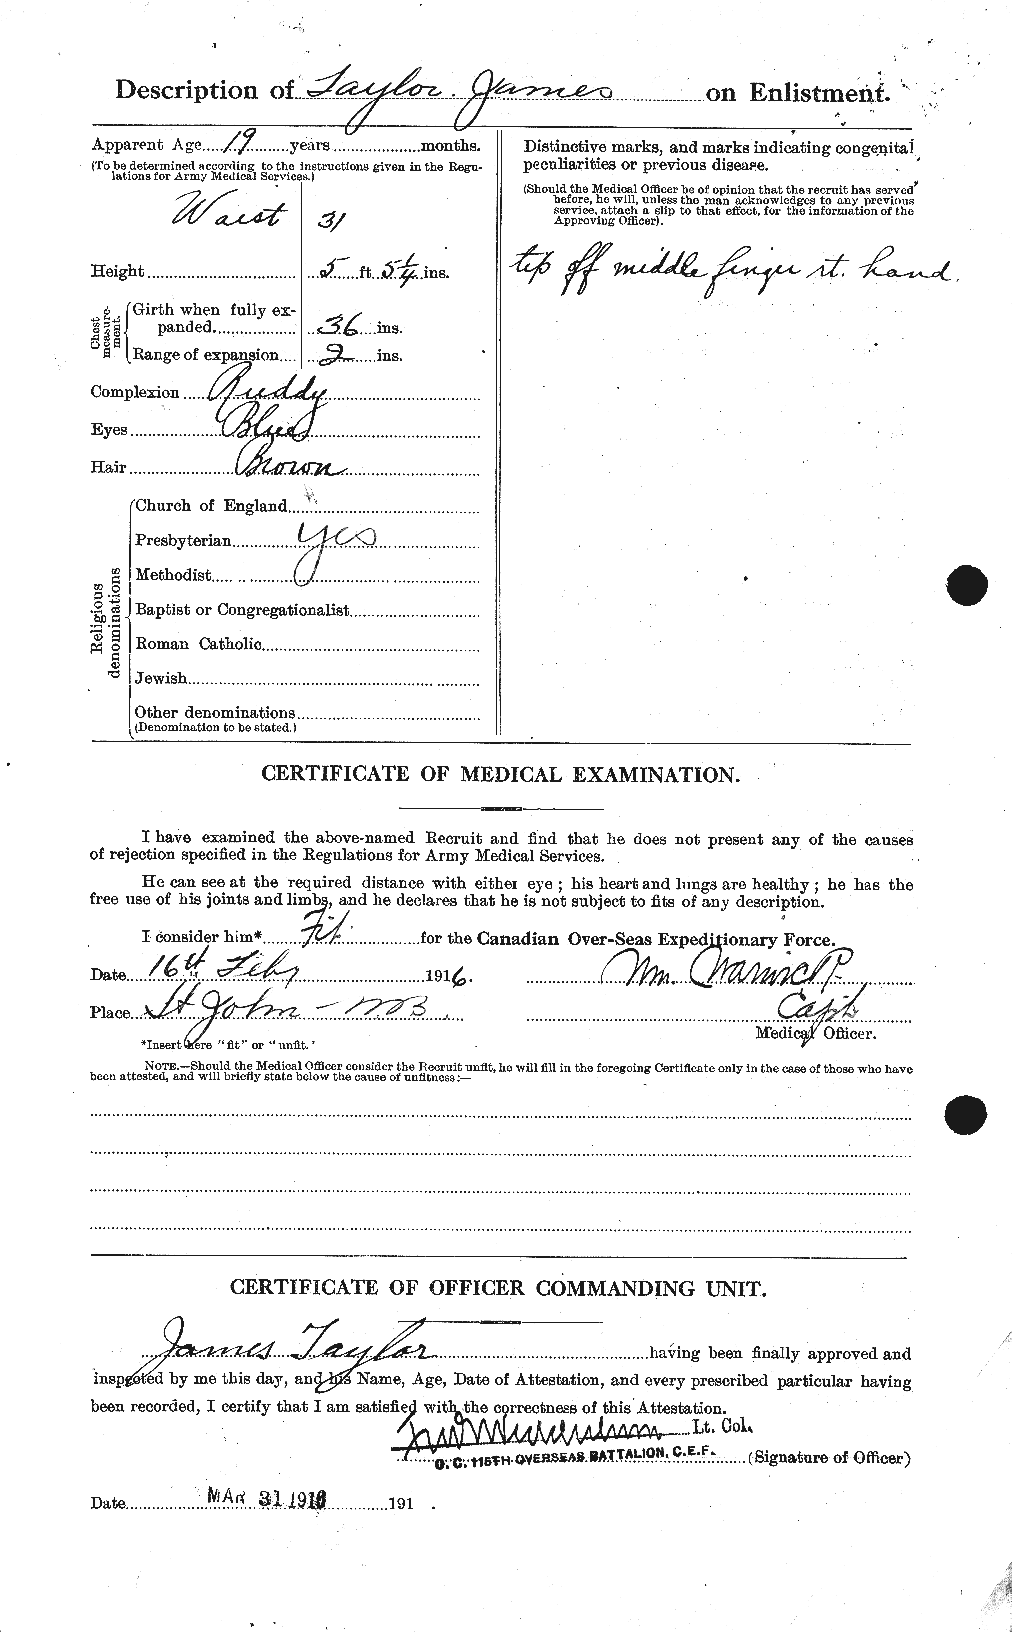 Personnel Records of the First World War - CEF 626692b